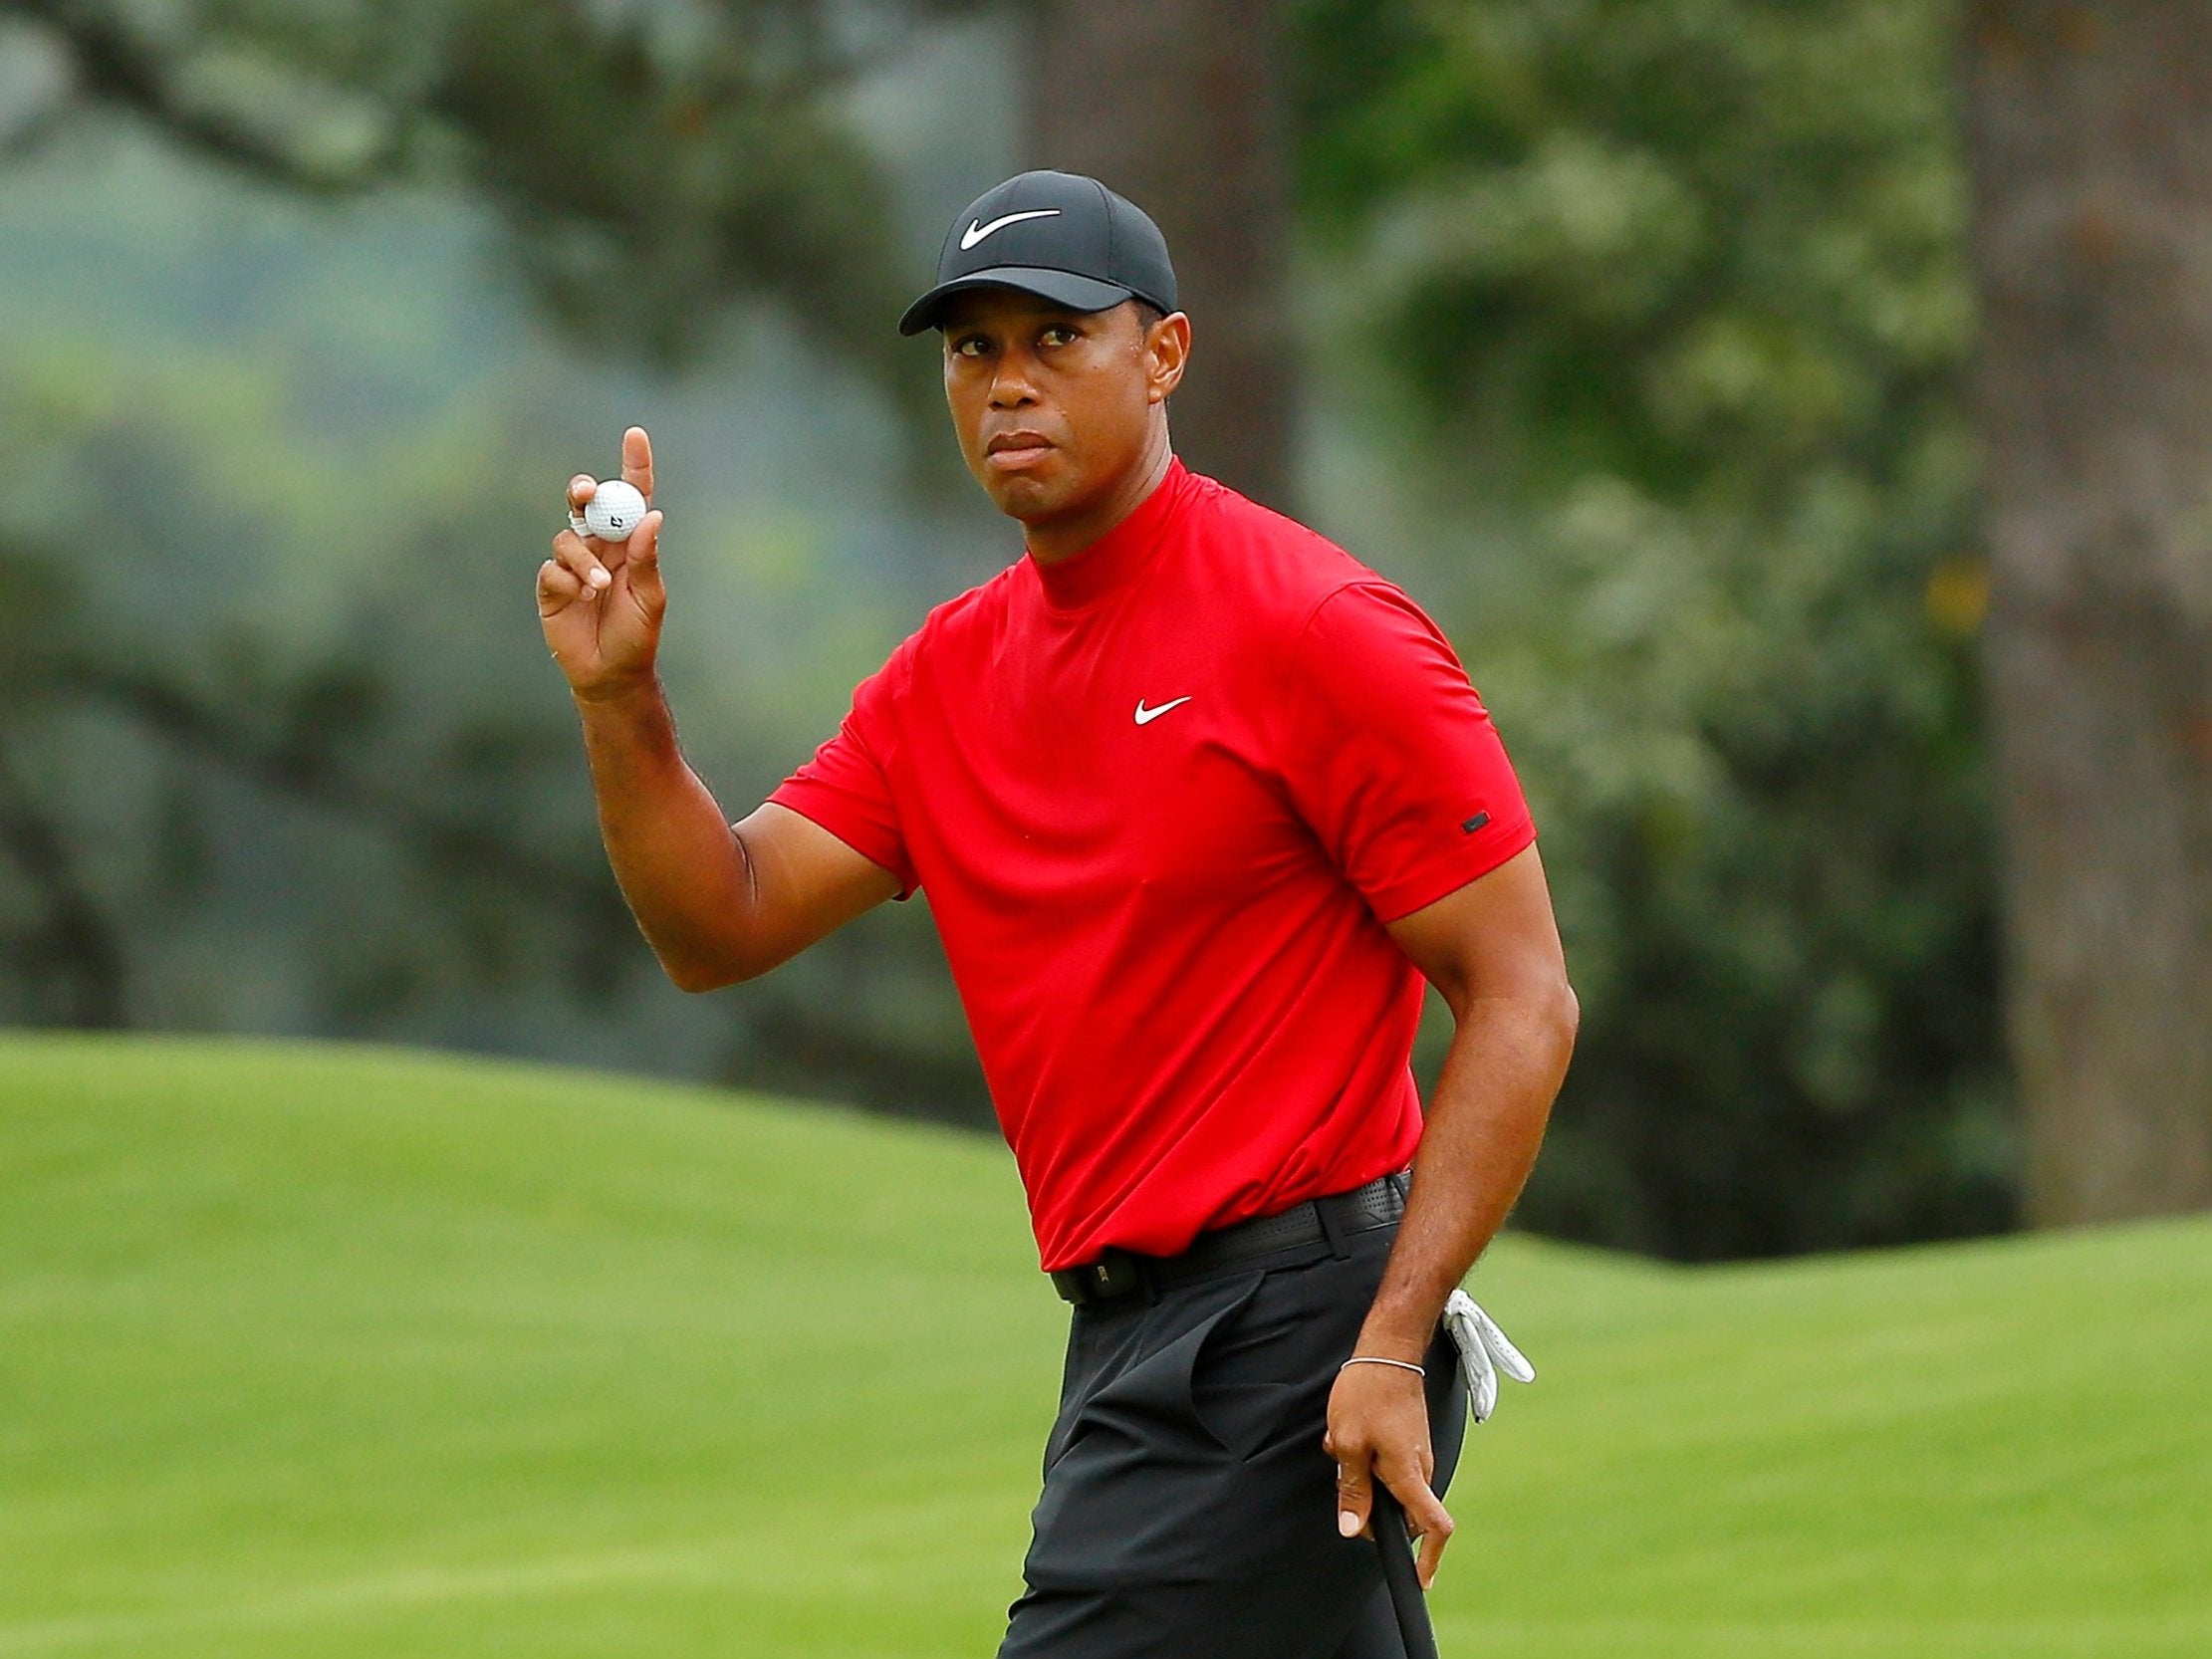 The Masters 2019: How much prize money does Tiger Woods win?